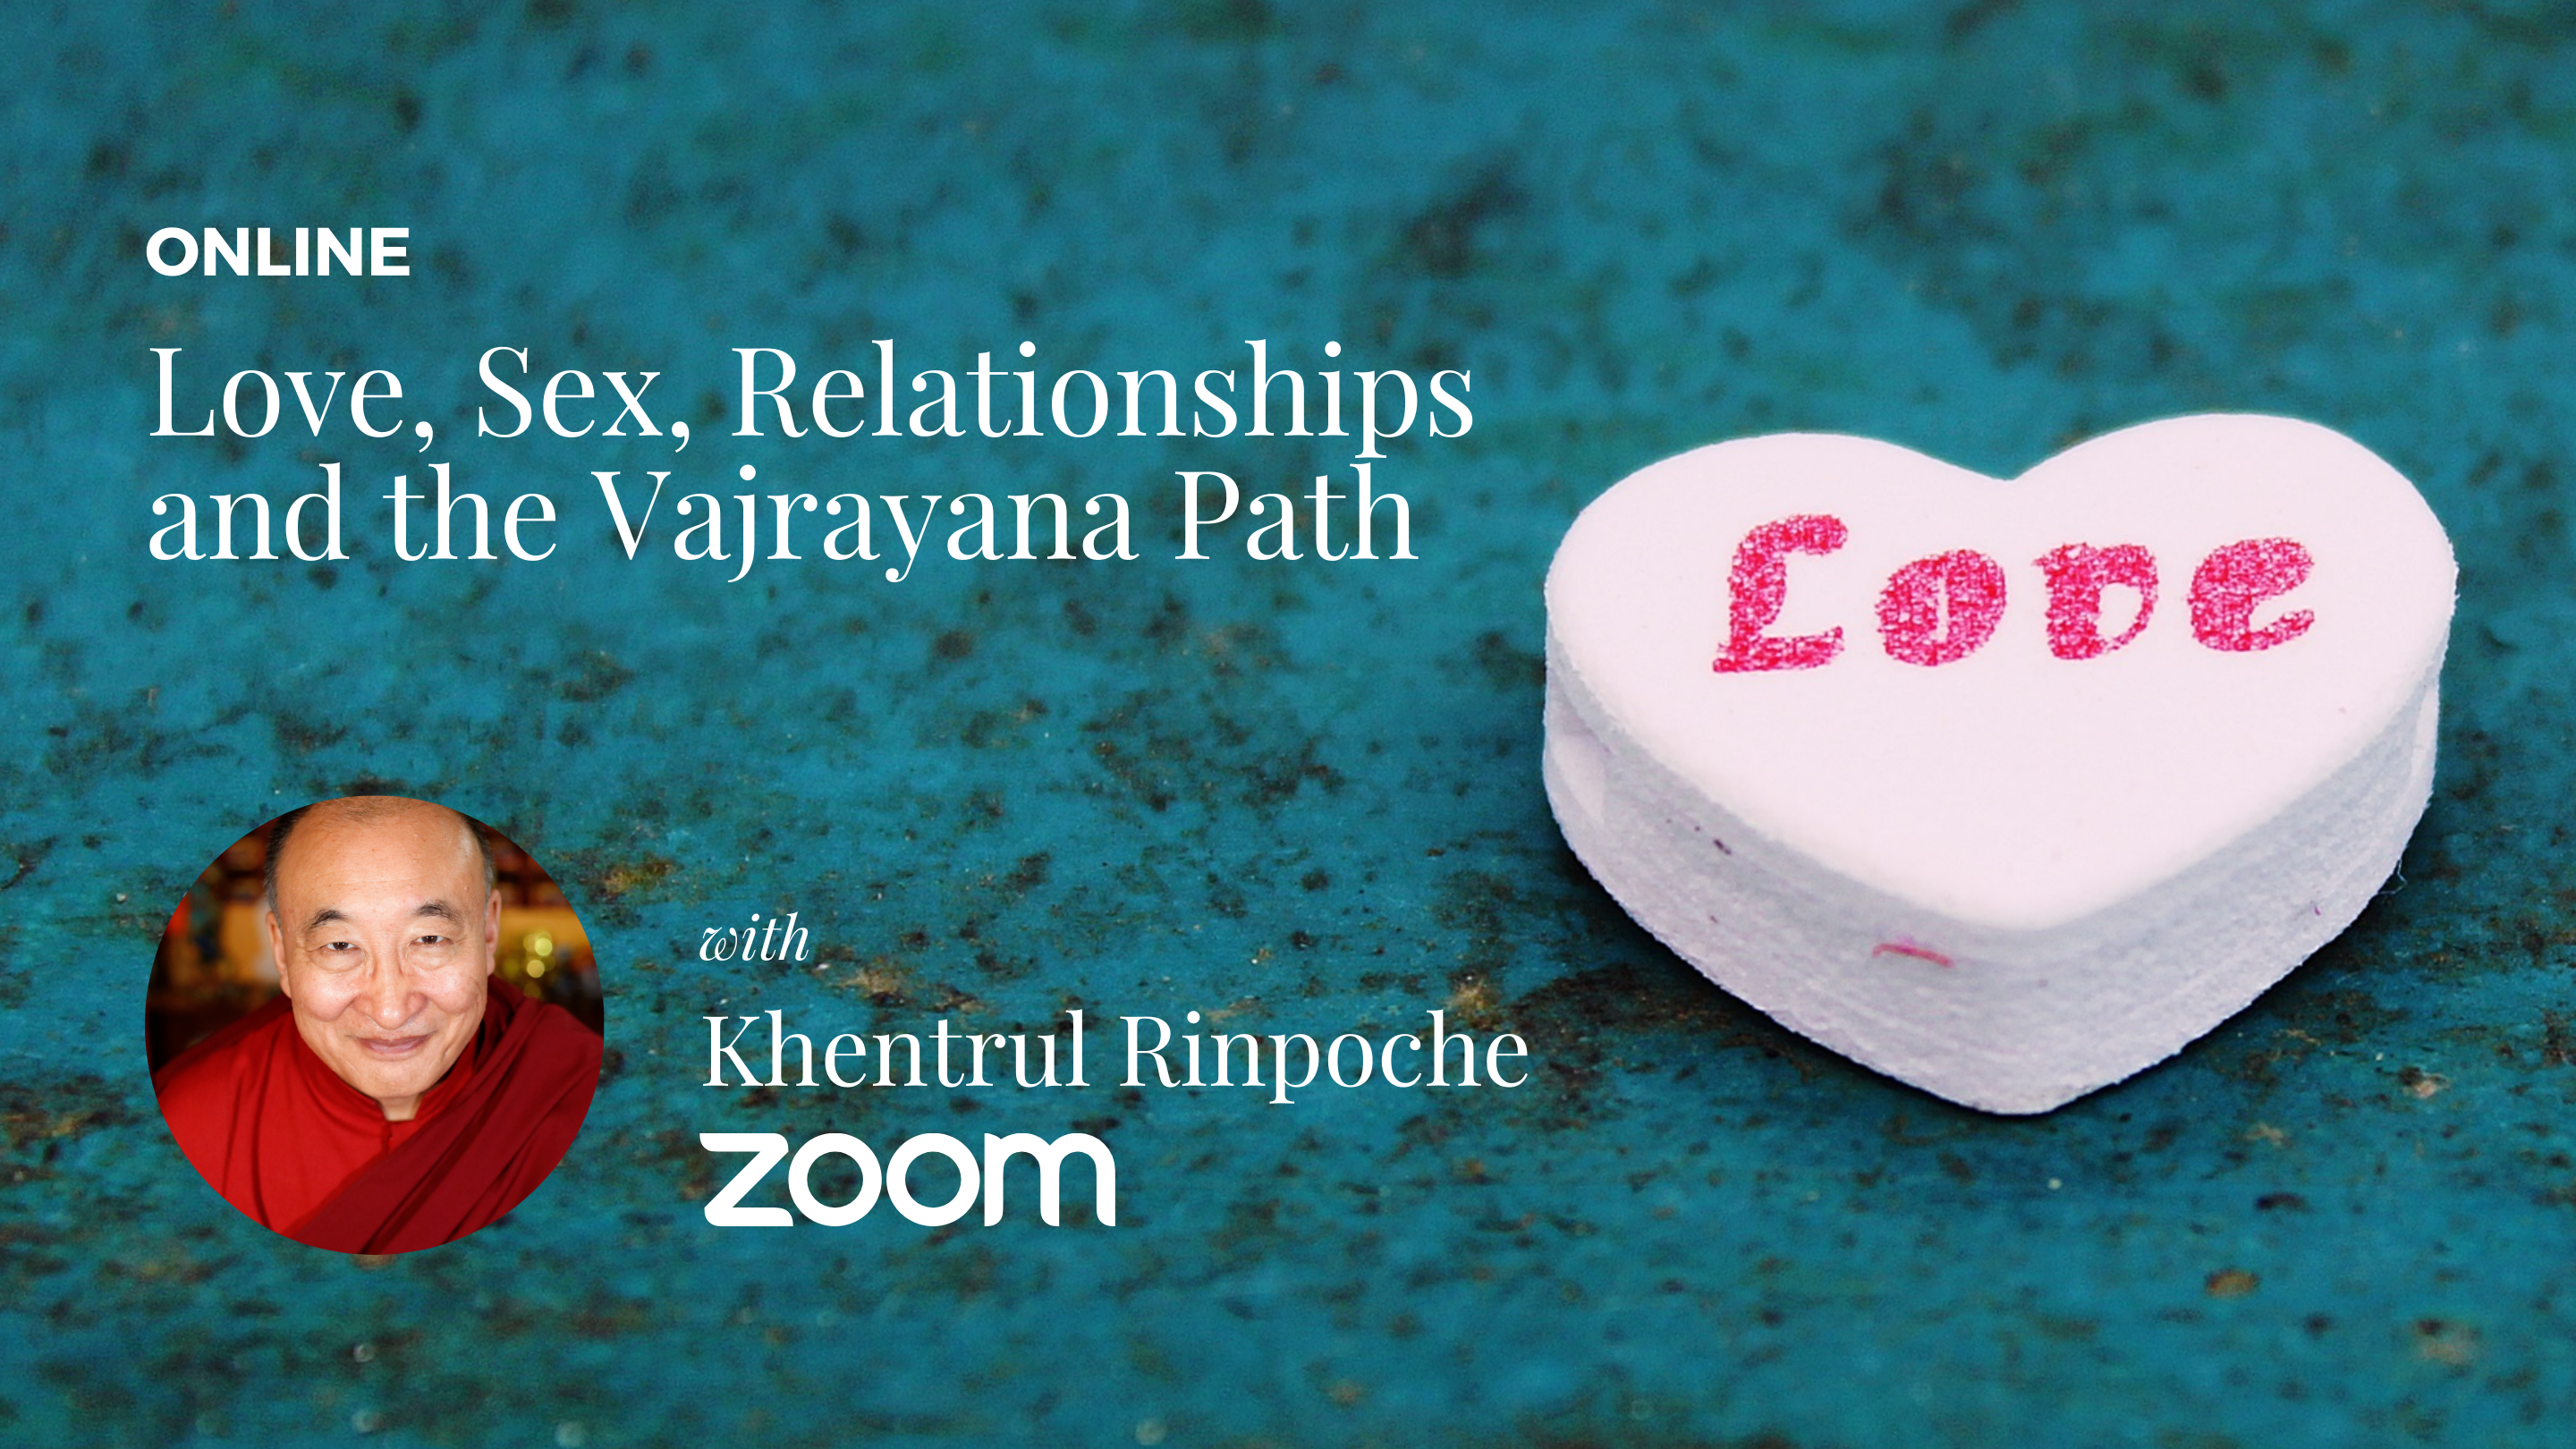 Online: Love, Sex, Relationships and the Vajrayana Path